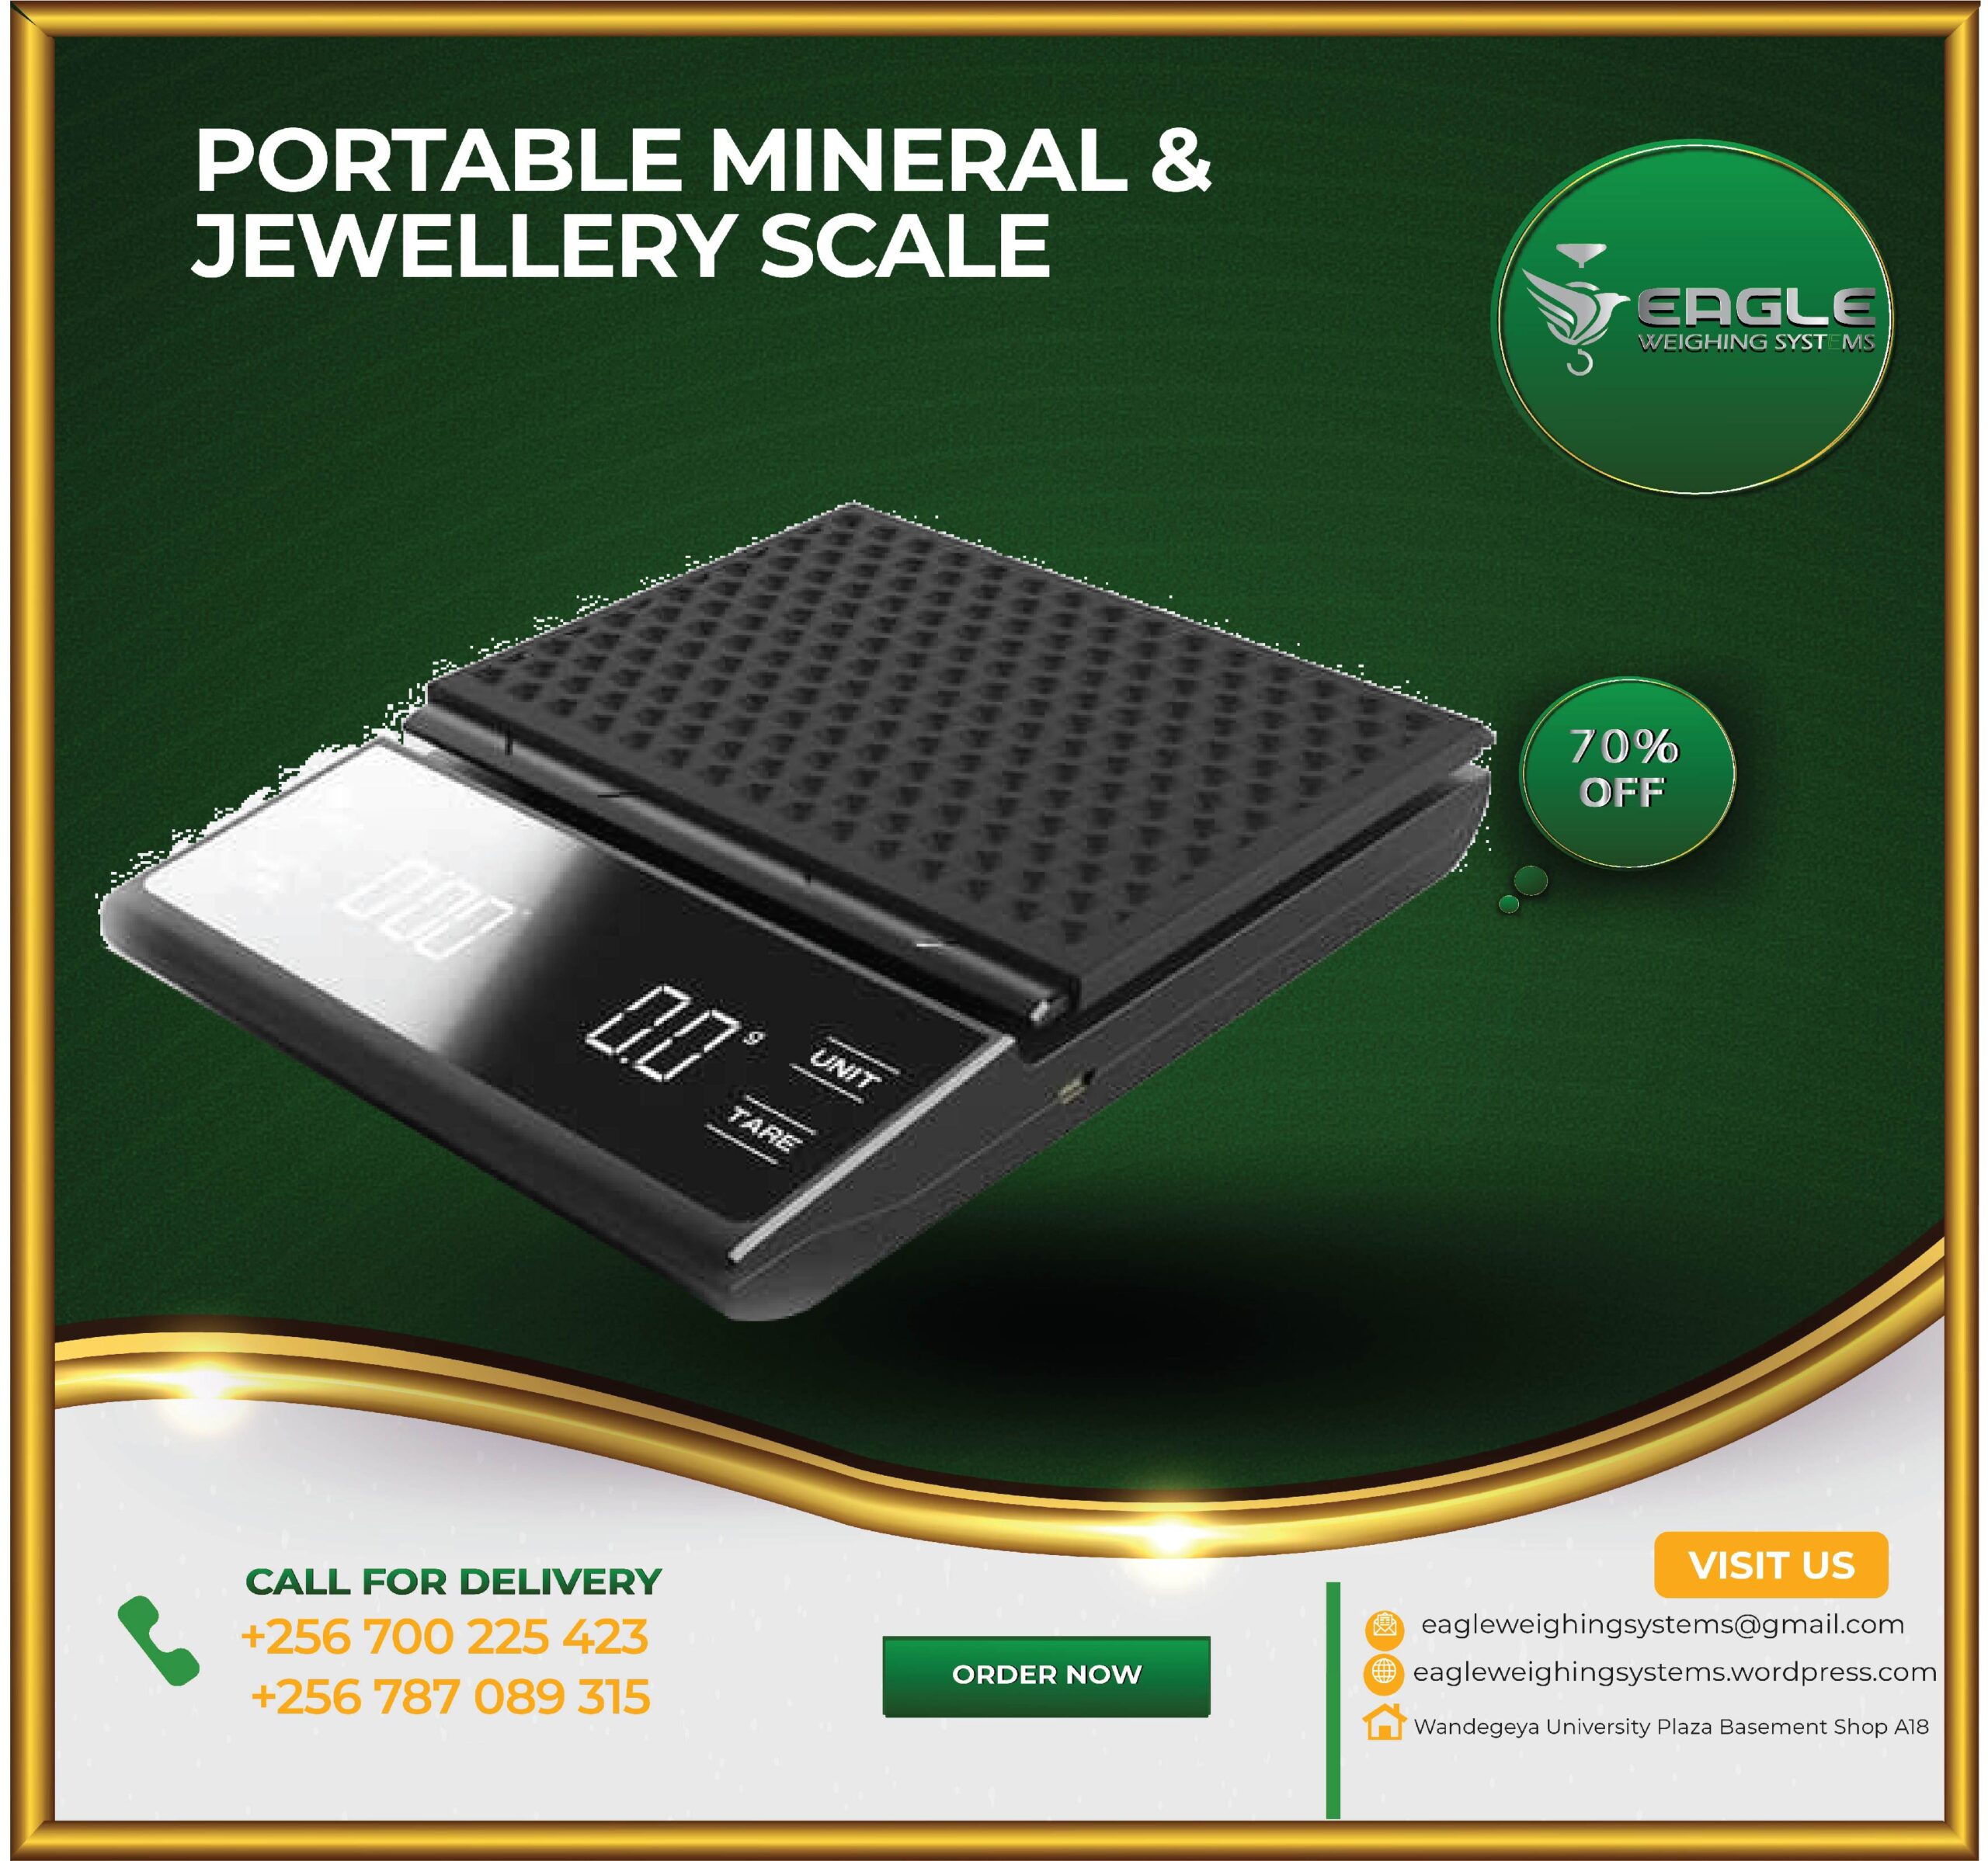 Jewelry Weighing Scales Provider - Weighing Scales In Kampala